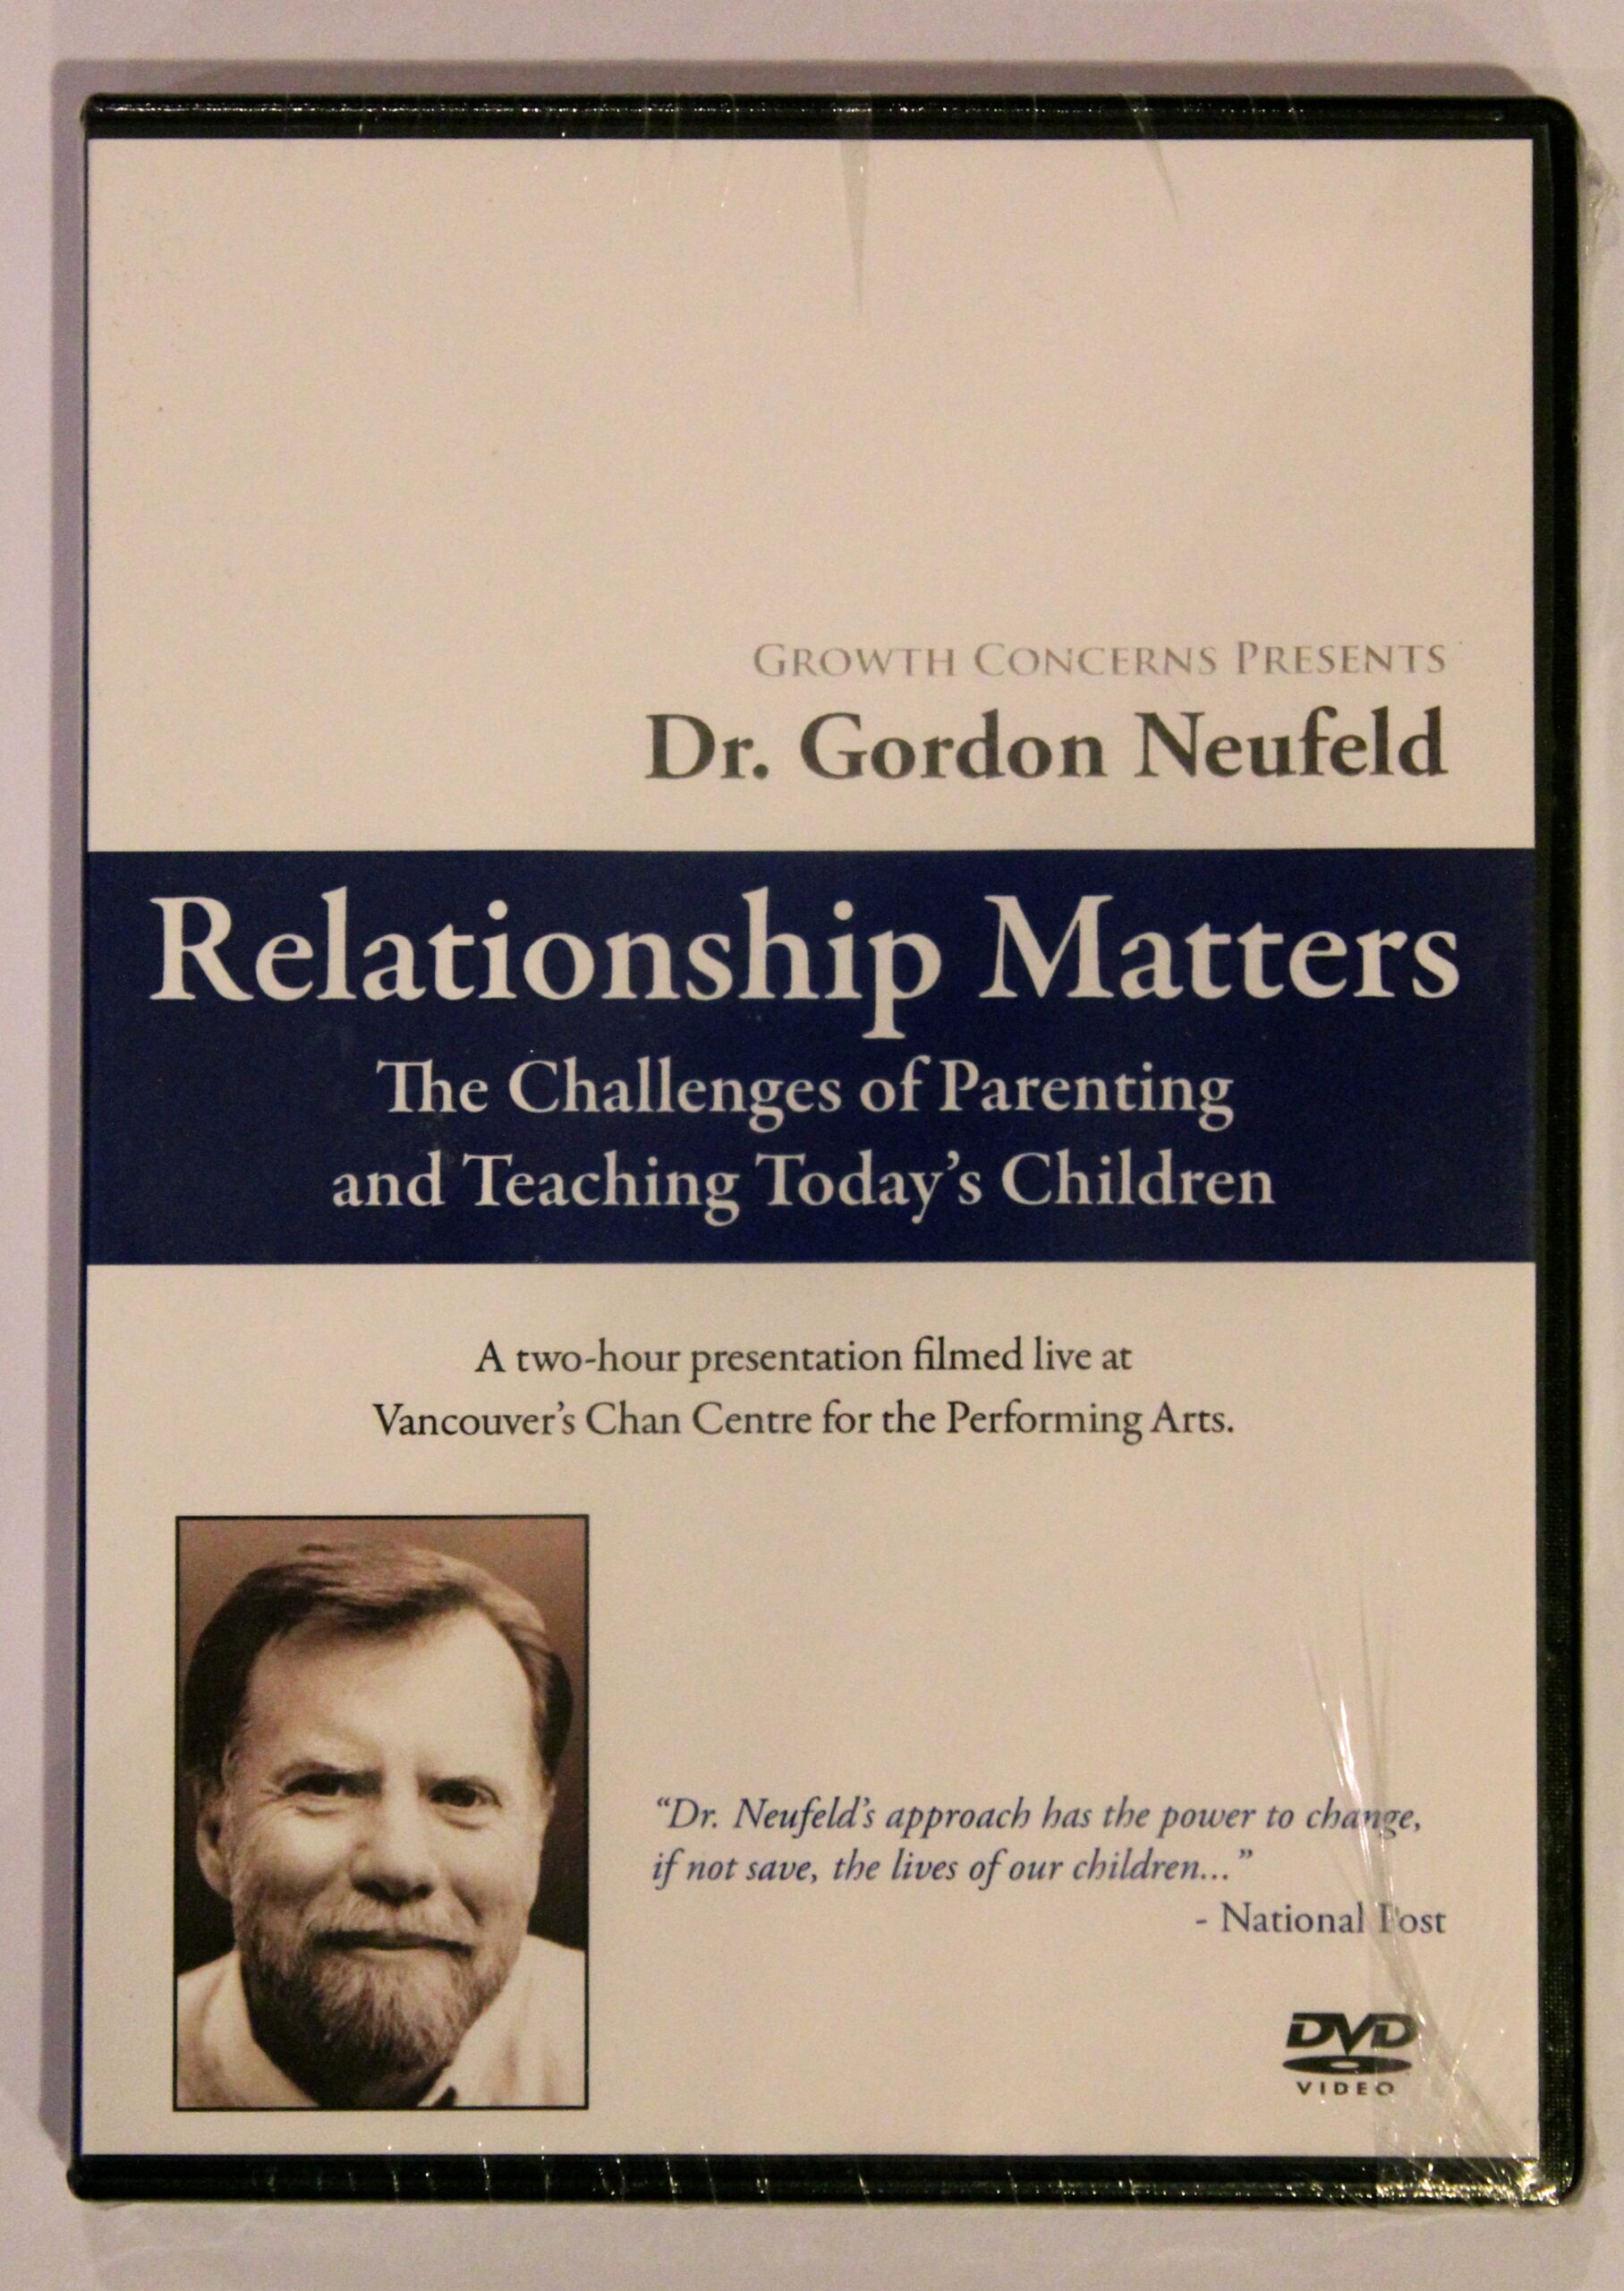 The Challenges of Parenting and Teaching Today's Children